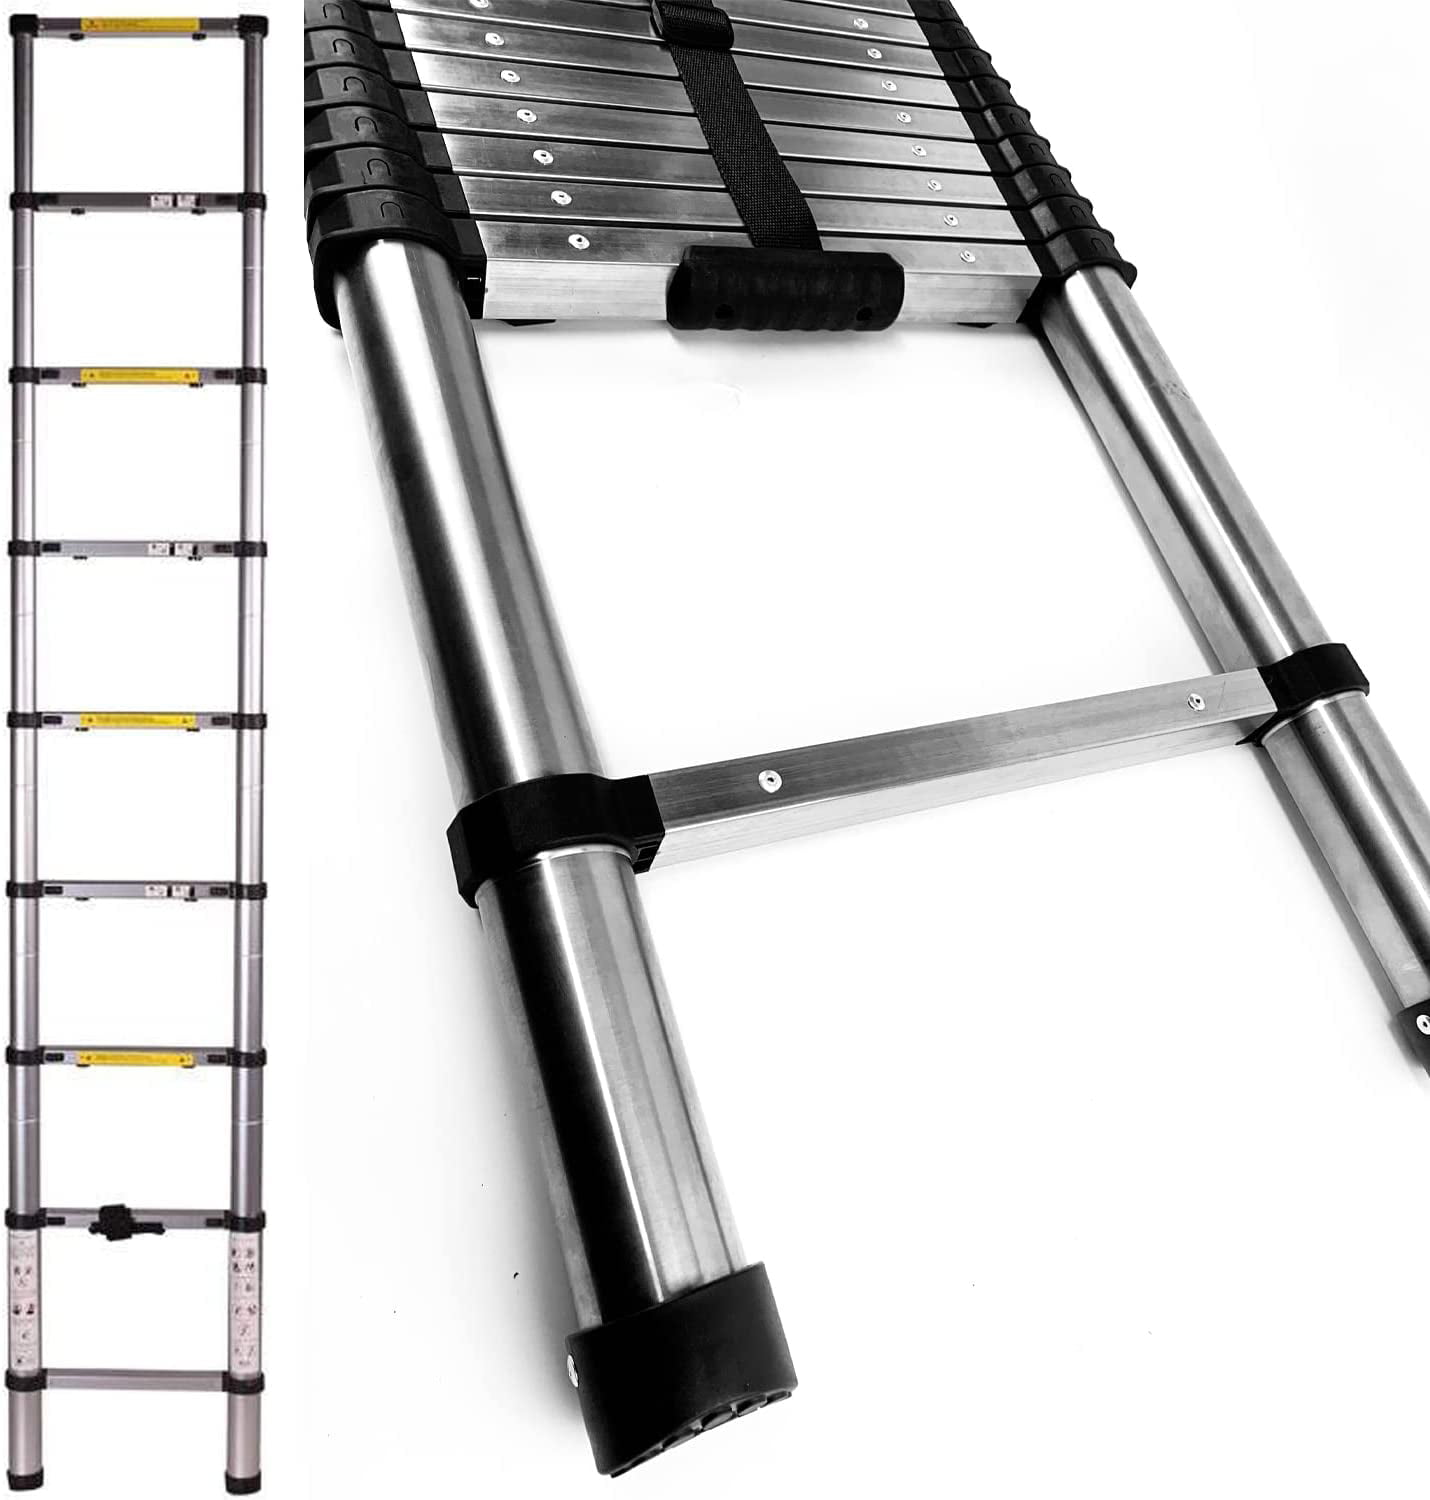 Lee labyrint Detector Dayplus Stainless Steel Telescoping Ladder 8.5FT Collapsible RV Ladder  Heavy Duty Max 330lbs - Walmart.com